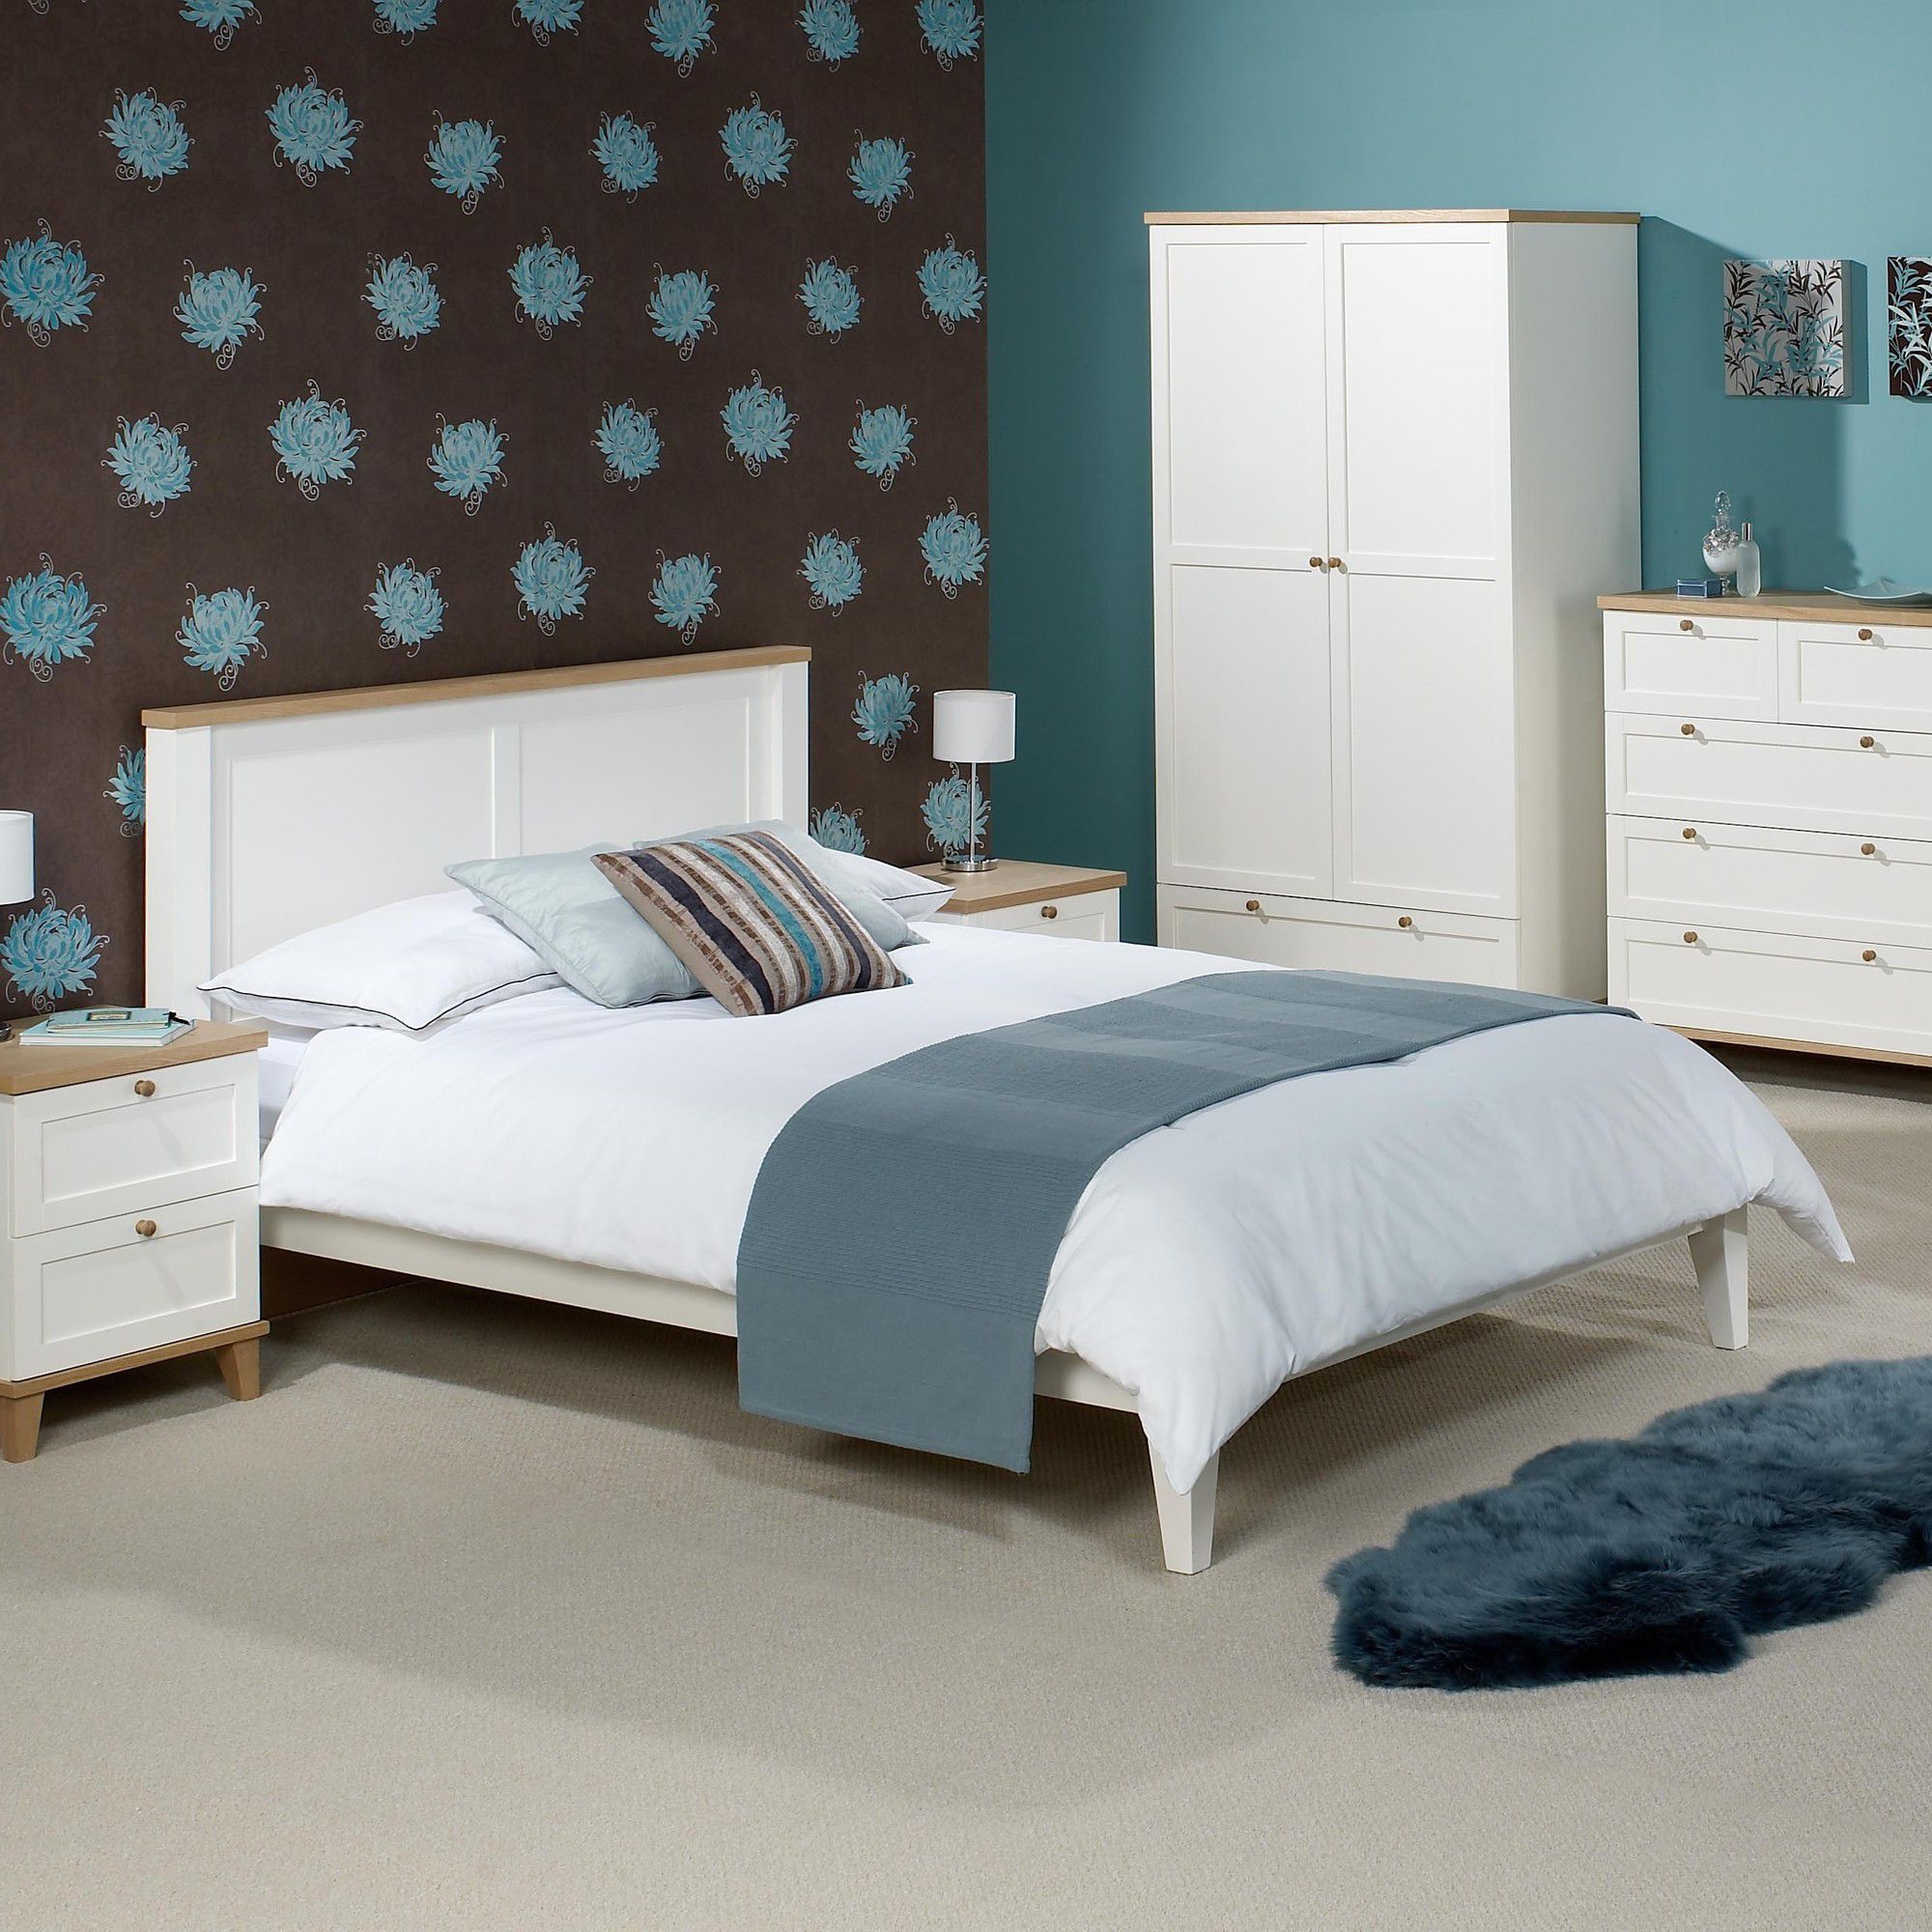 Home Zone Chicago Bed Frame - Kingsize at Tesco Direct